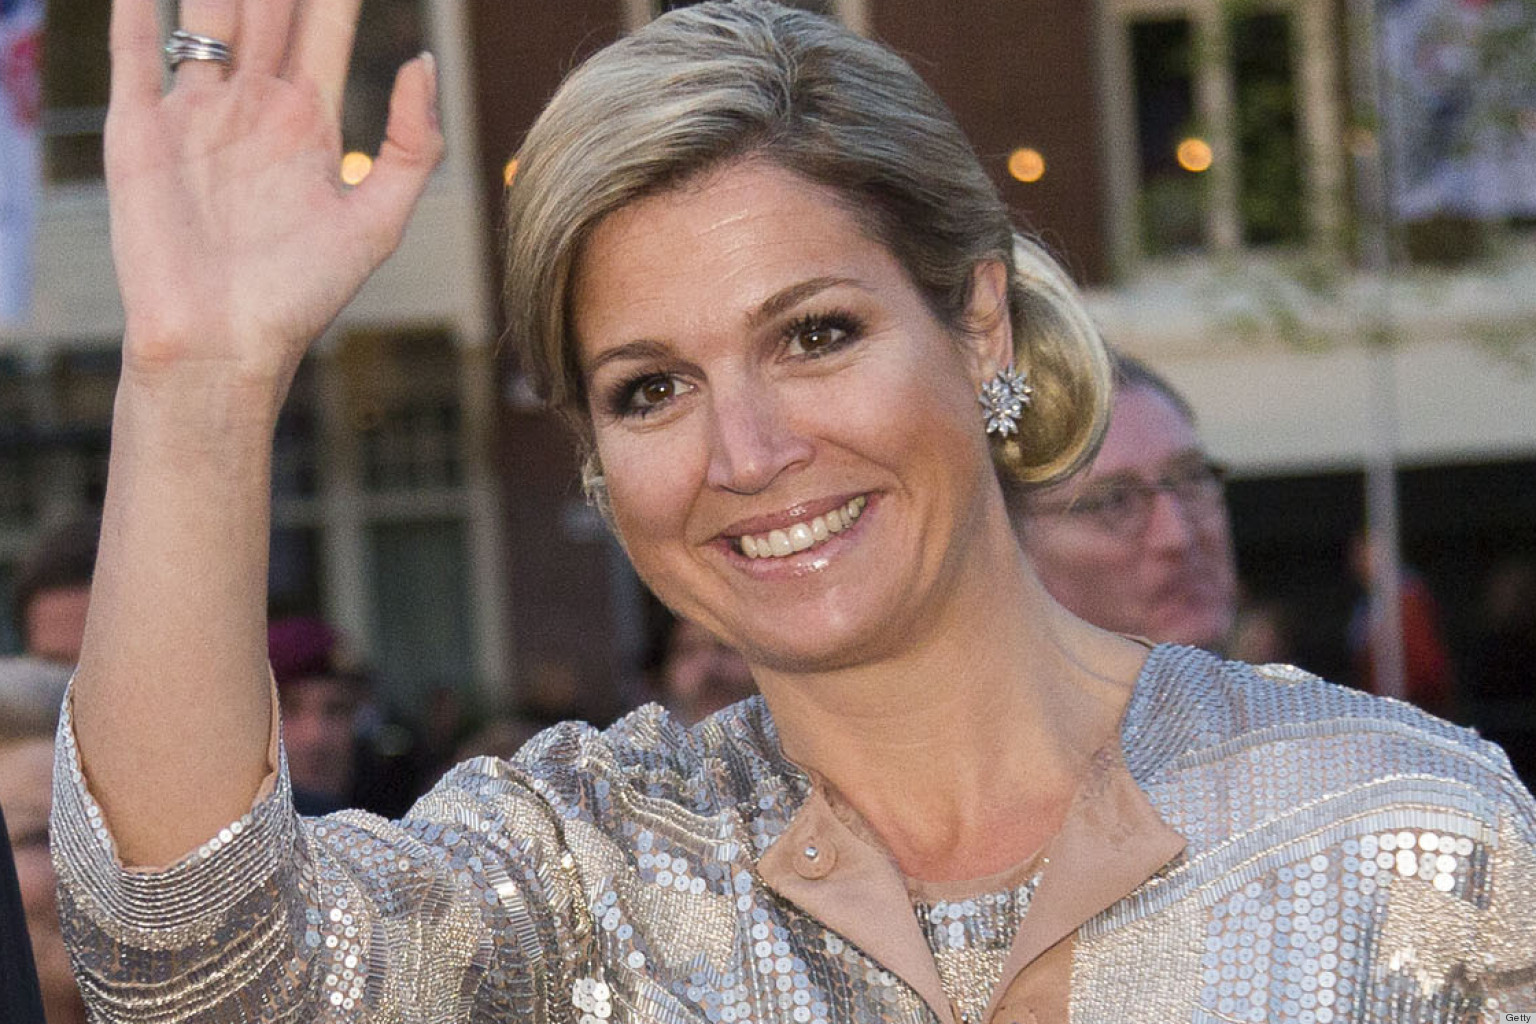 AMSTERDAM, NETHERLANDS - MAY 5: King Willem-Alexander of The Netherlands and Queen Maxima of The Netherlands attend the Freedom Concert on May 5, 2013 in Amsterdam Netherlands.(Photo by Michel Porro/Getty Images)